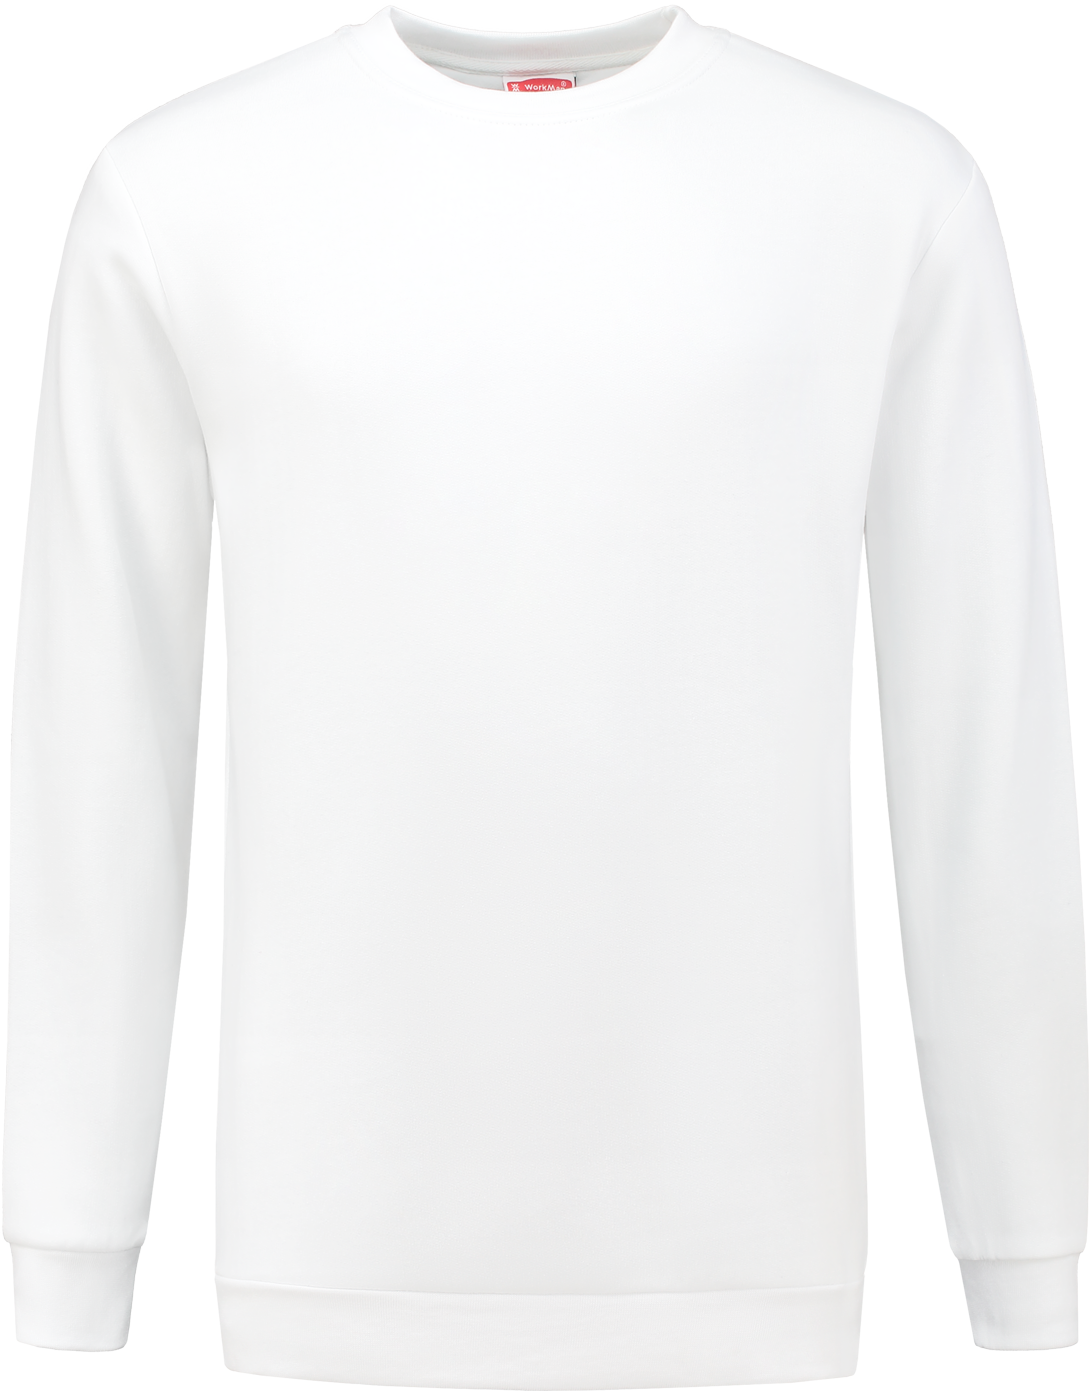 8201 Sweater Outfitters White